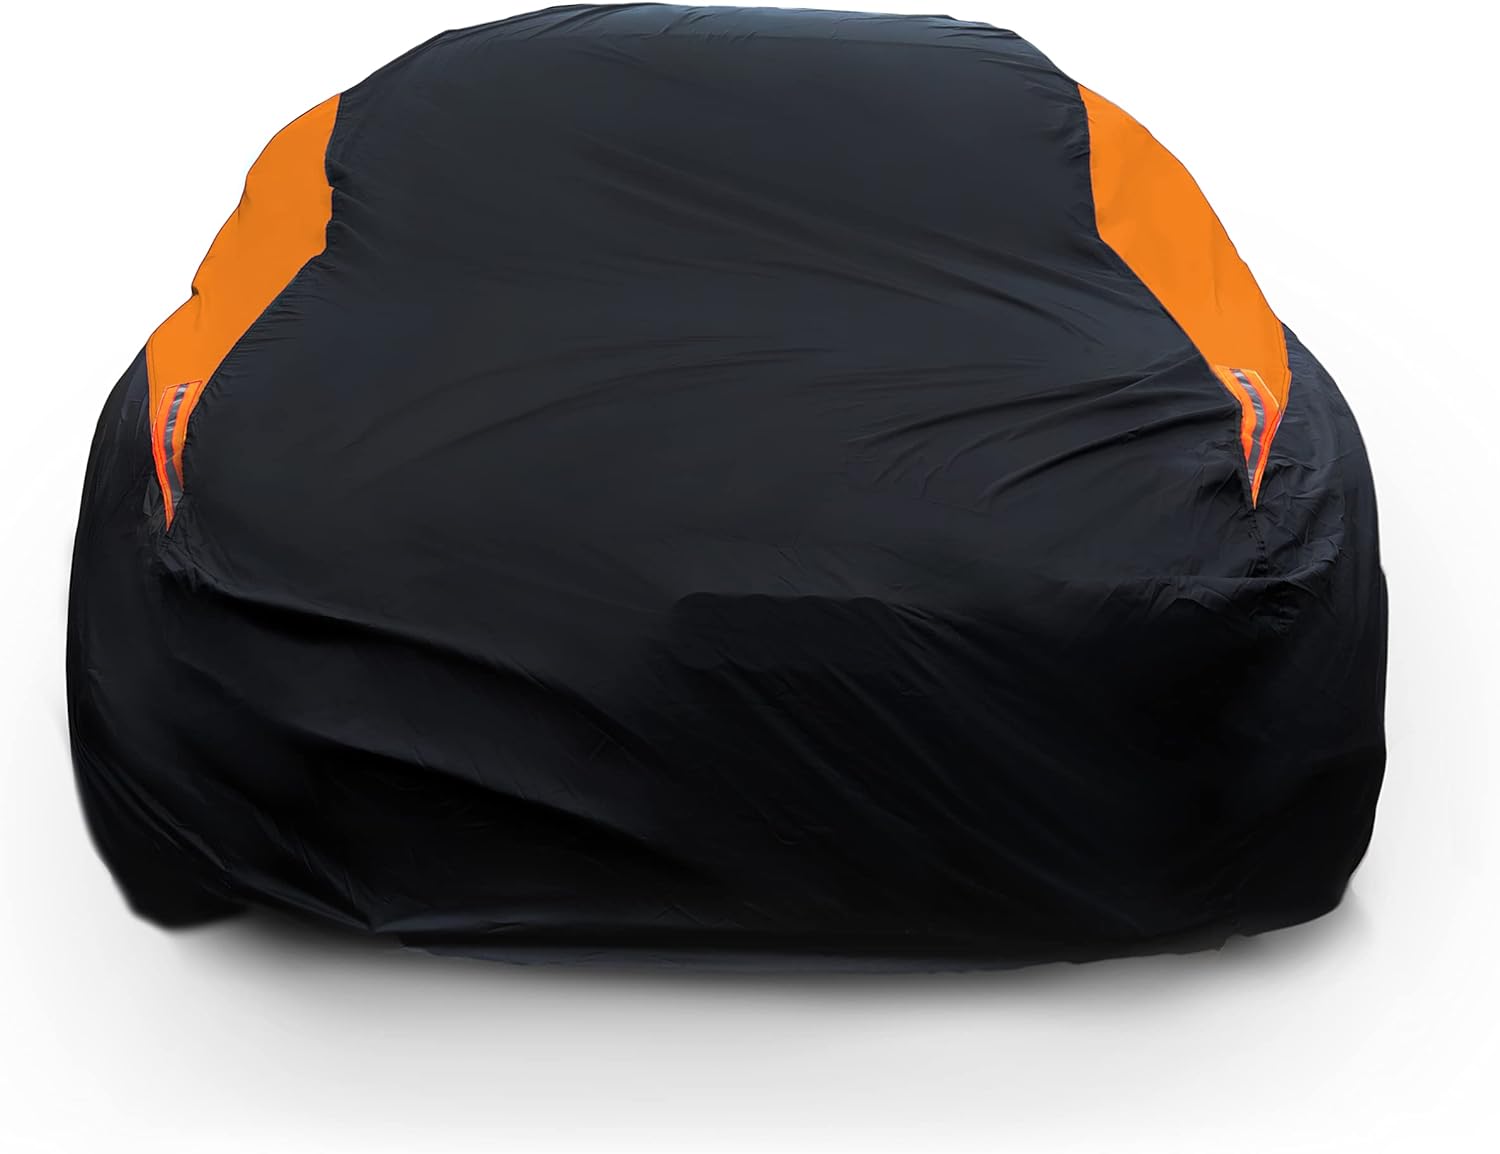 This is the best car cover I have ever owned. I got this cover just in time for a nasty snowstorm in CT. When I took it out of the package, I was a little skeptical as to how much it weighed. Would it actually do the job Well yes it did!!!! It was so easy to get on the car. And when it came time to clean off the snow and ice the next morning it was actually a breeze. Unlike other covers that can stick to your car because of the ice and temperature, this did not. And it comes with 2 straps to sa